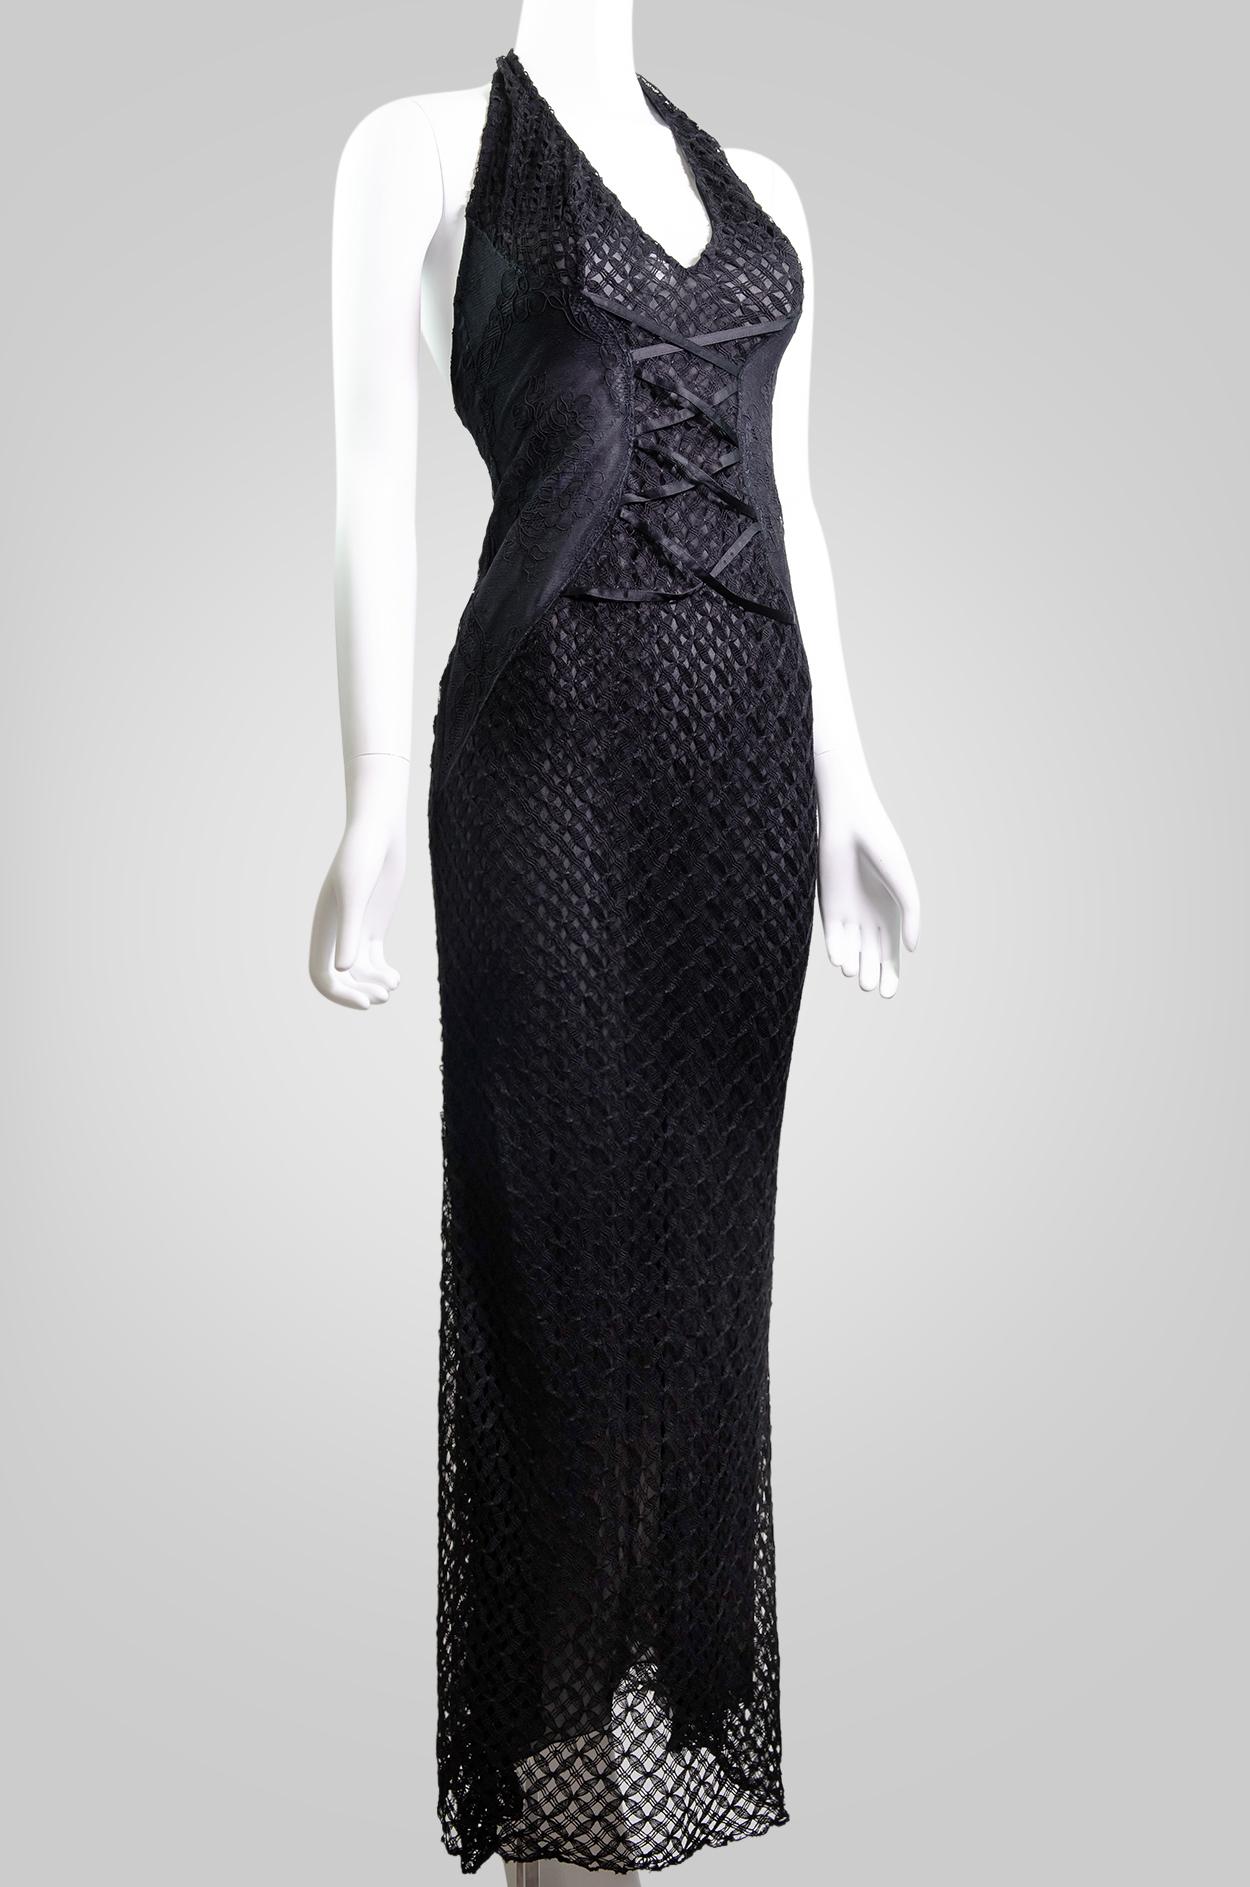 VERSACE S/S 2002 Vintage Sheer Lace Knit Gown  5